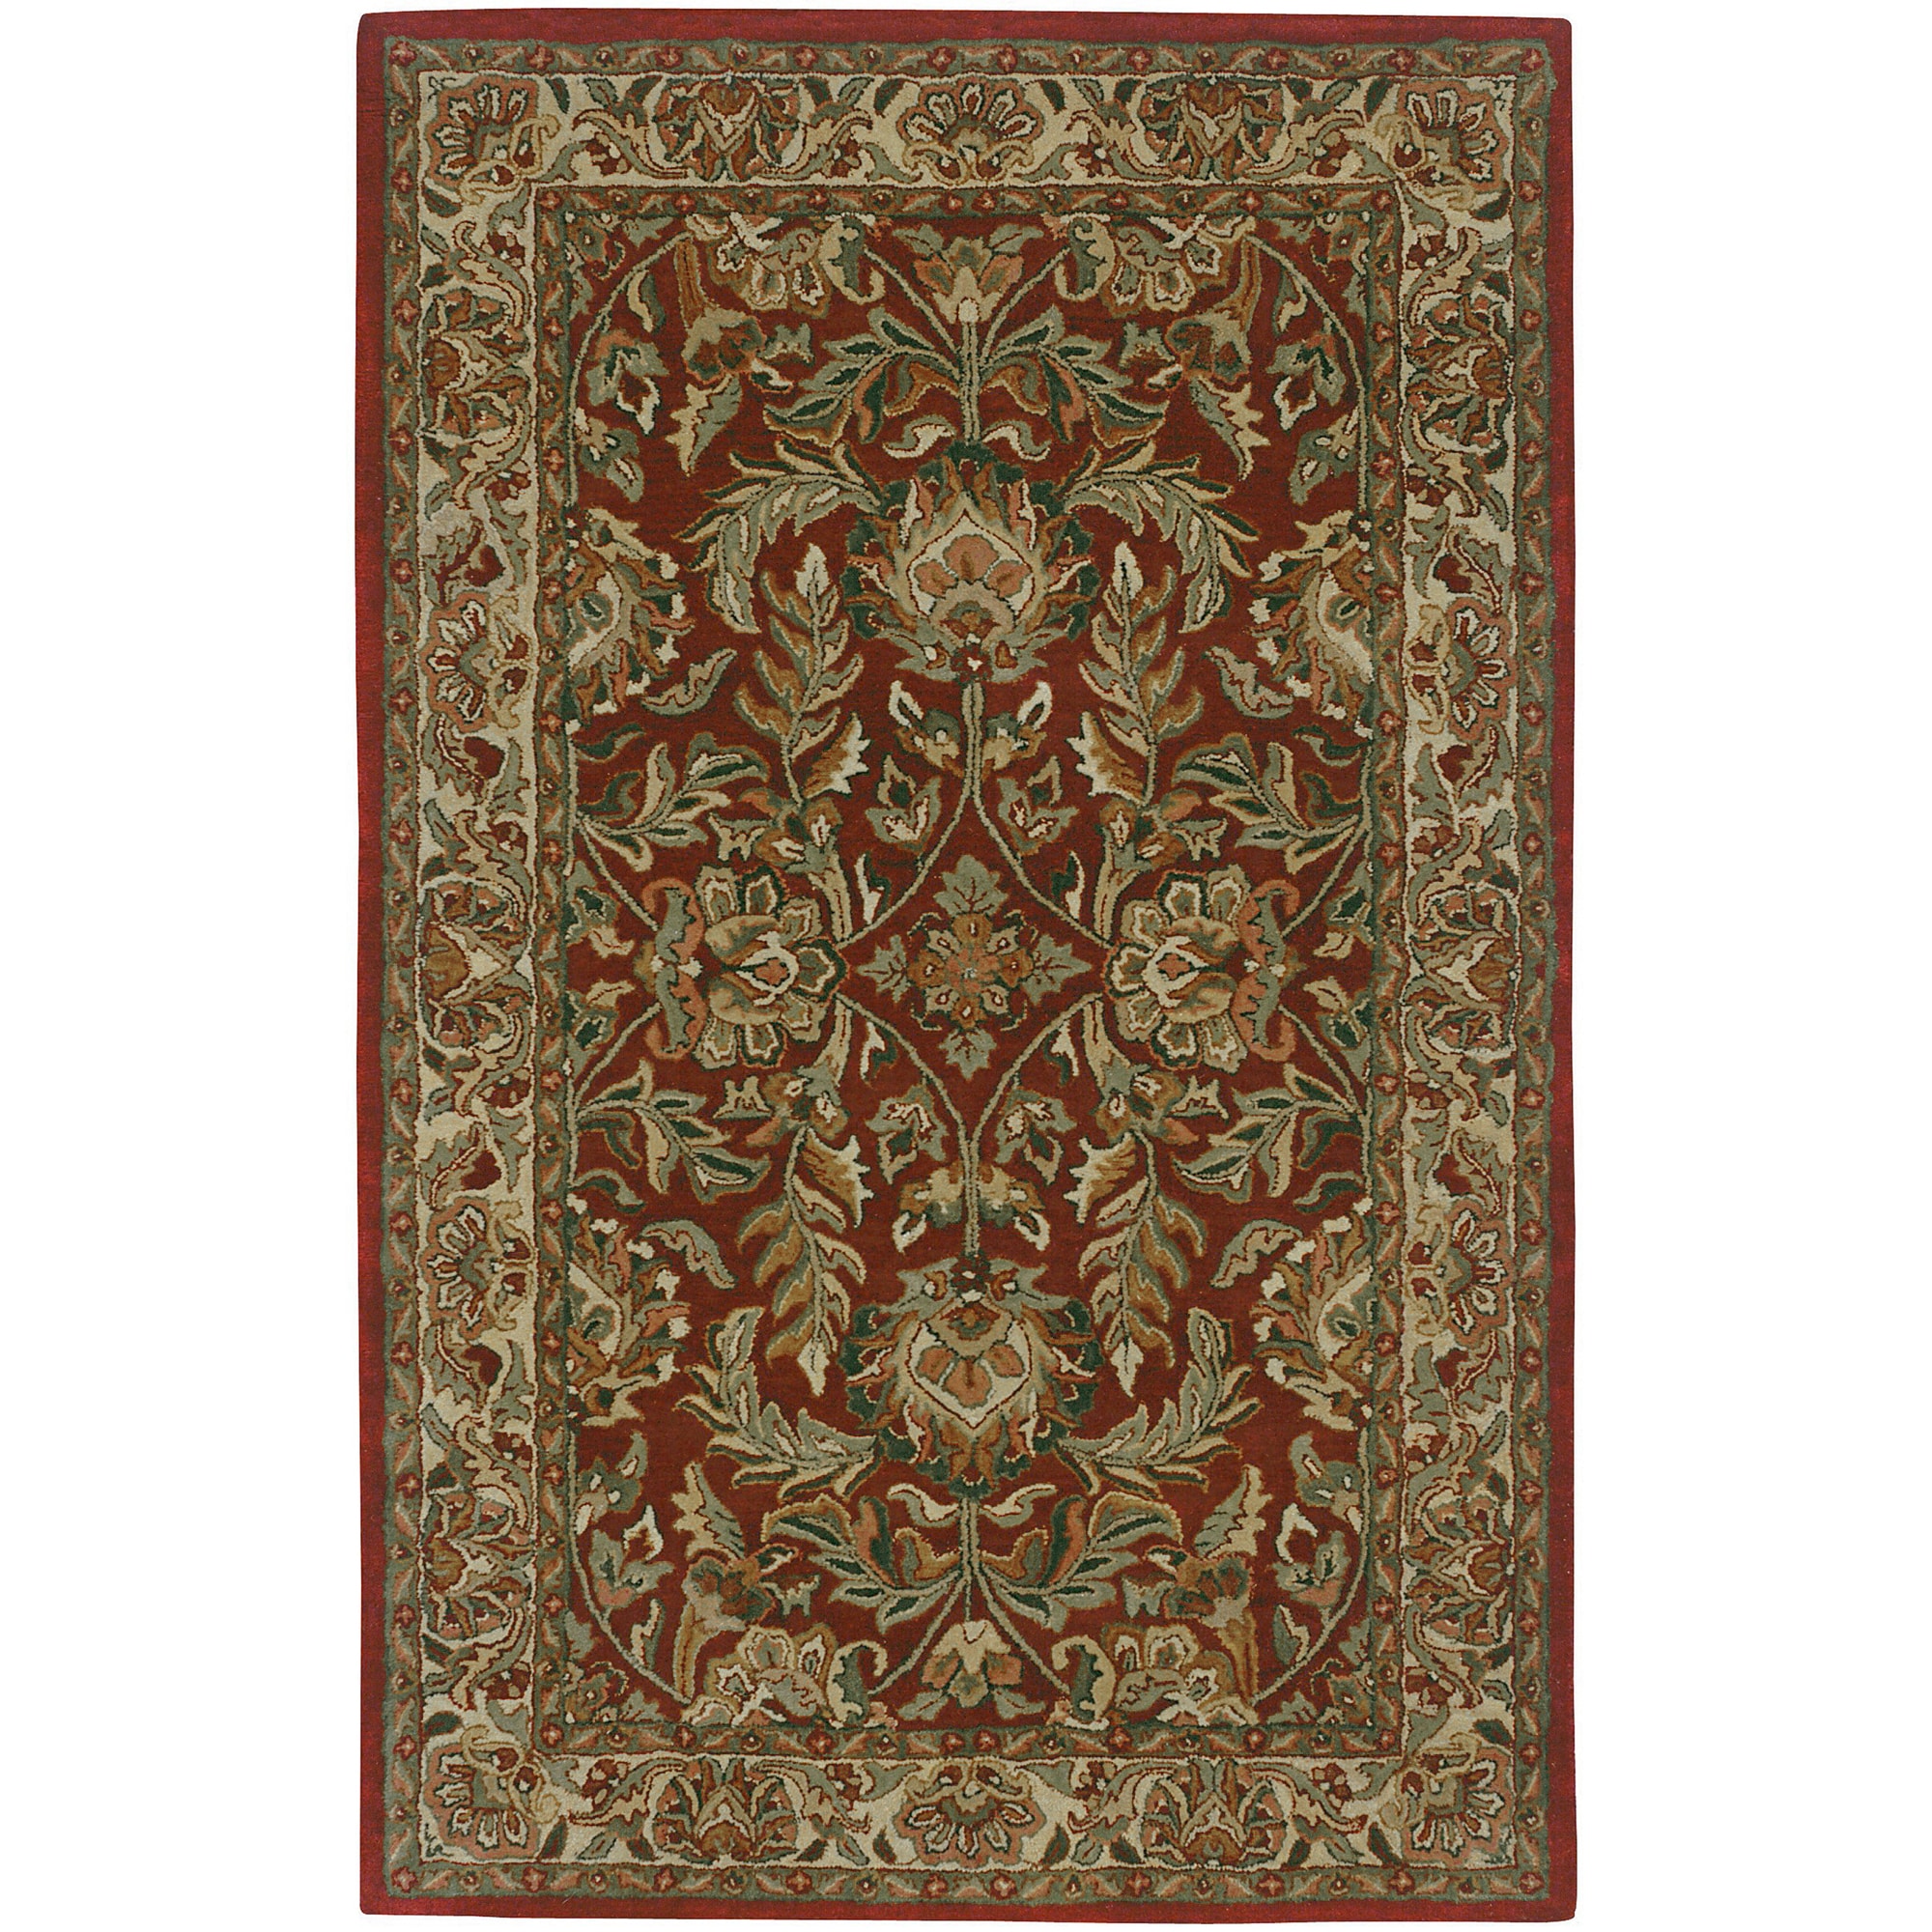 Burgundy Oval, Square, & Round Area Rugs from Buy